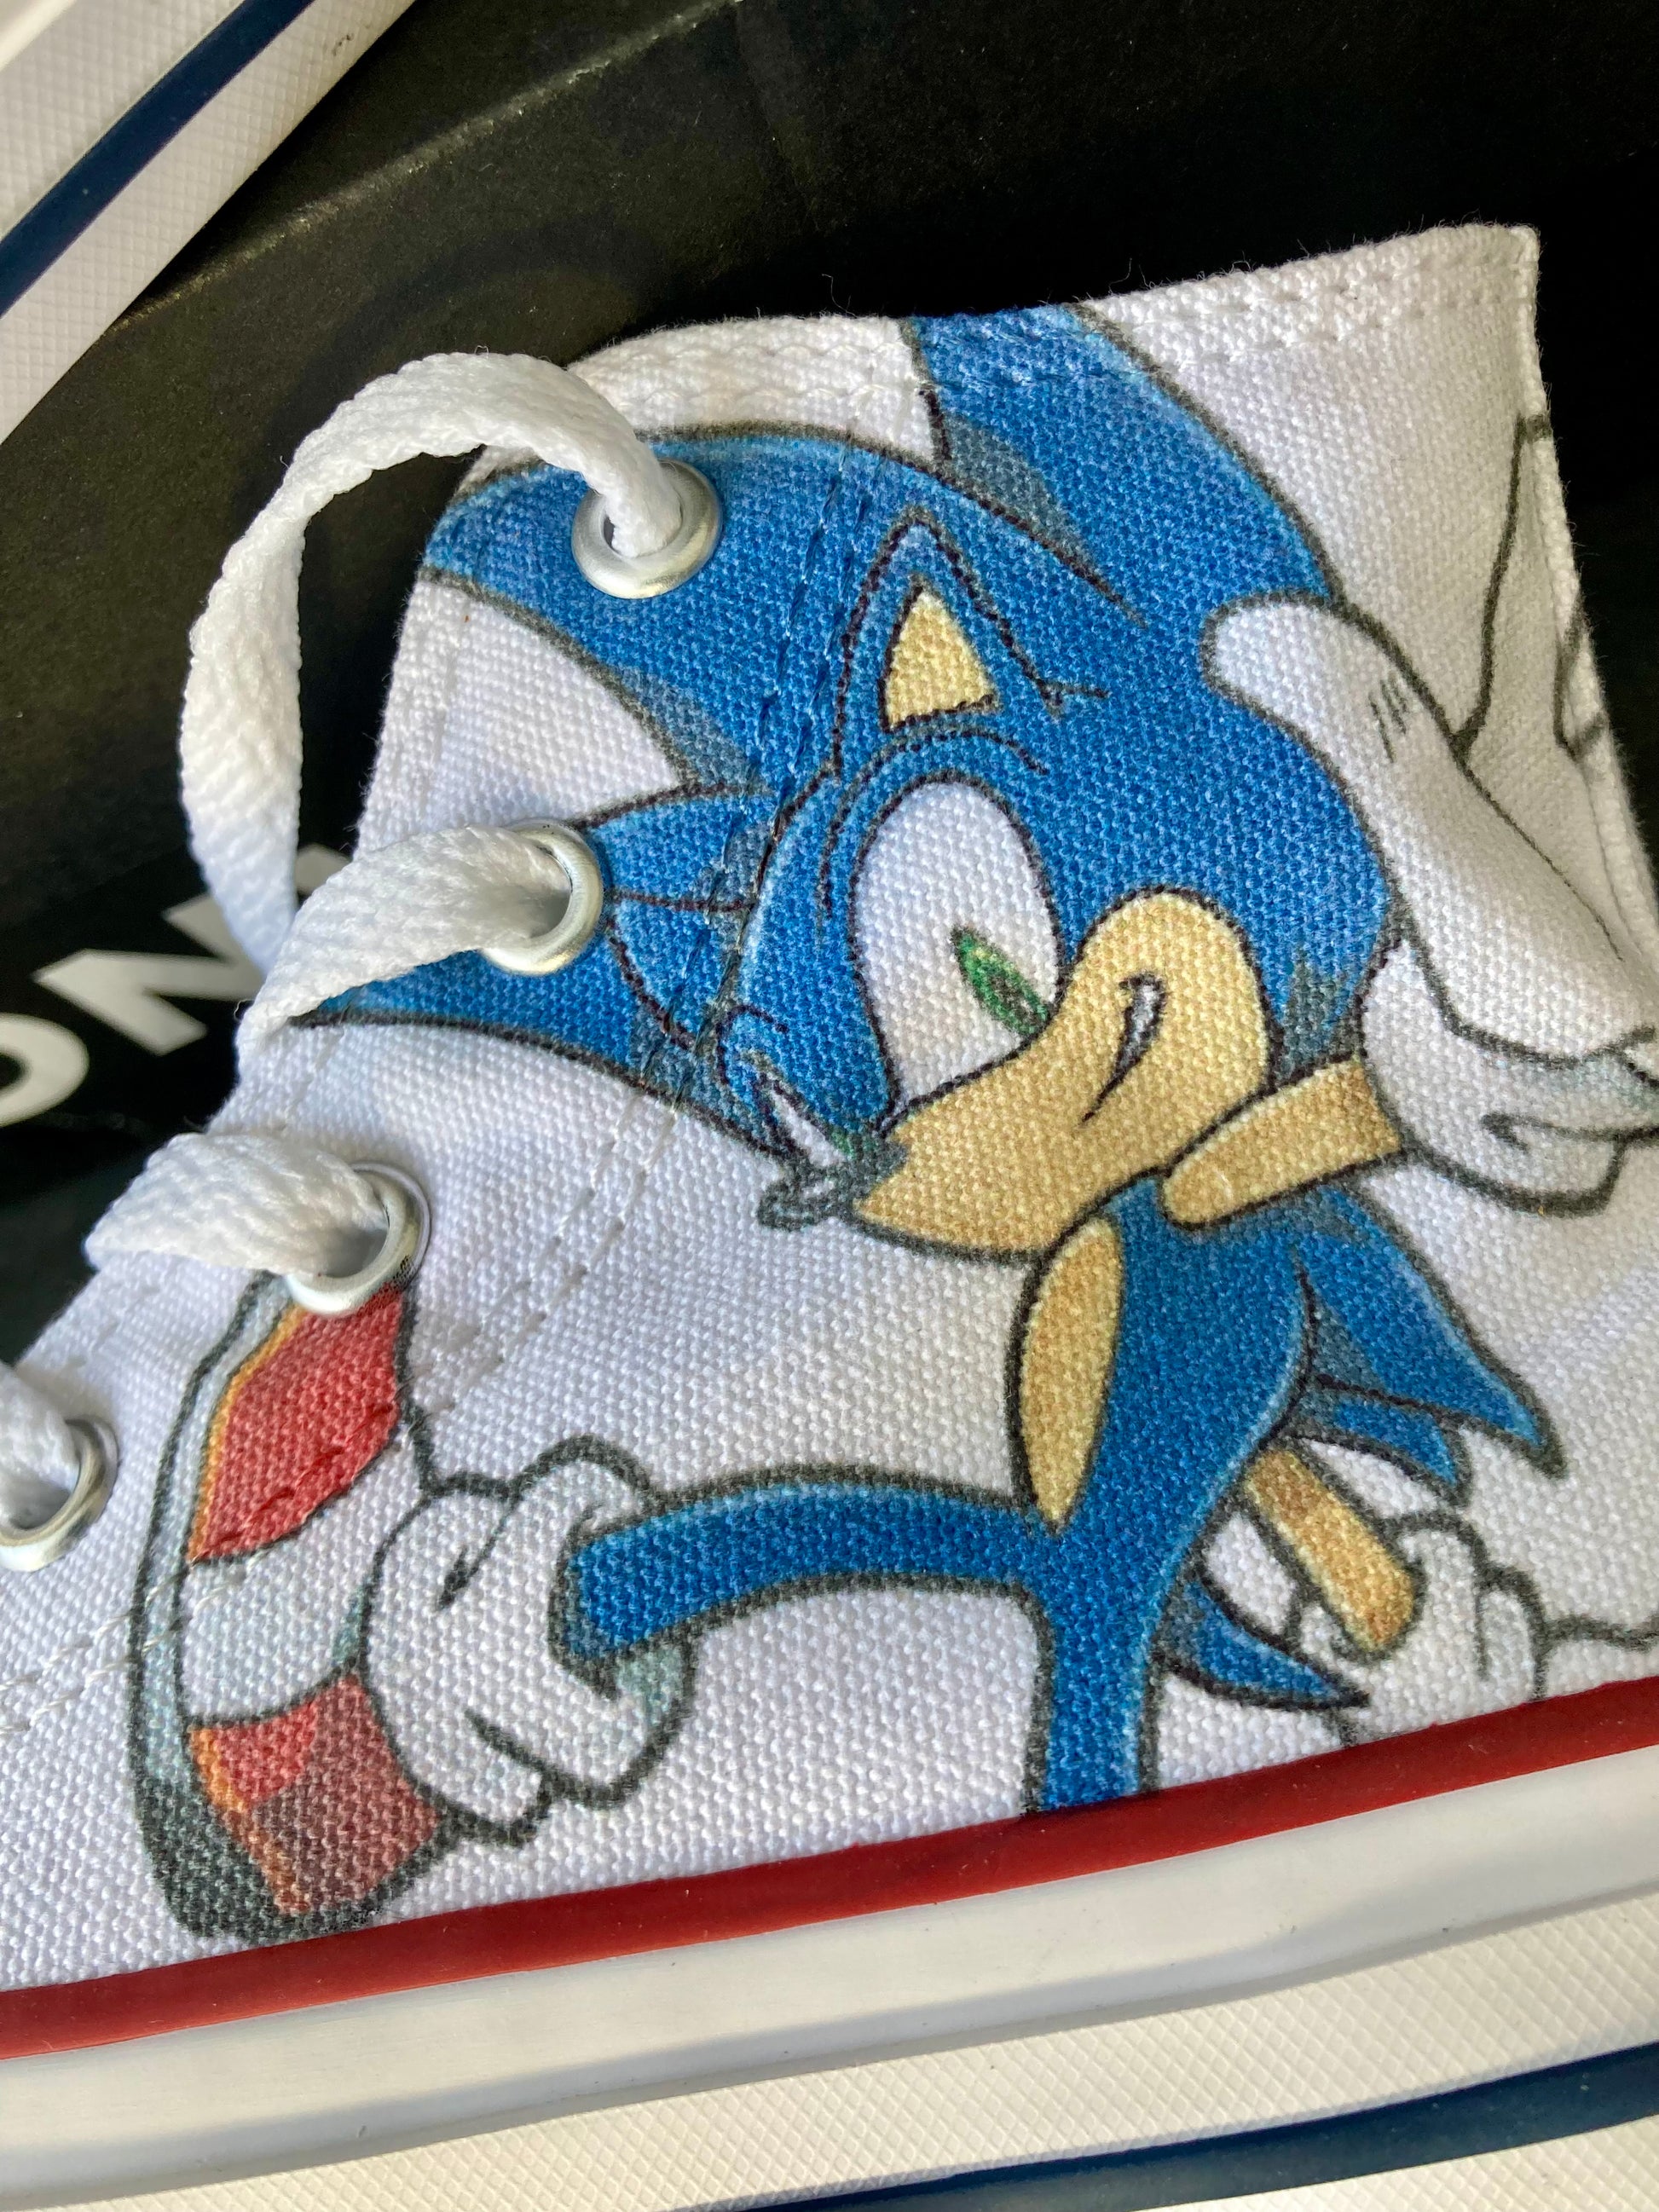 sonic converse high top shoes